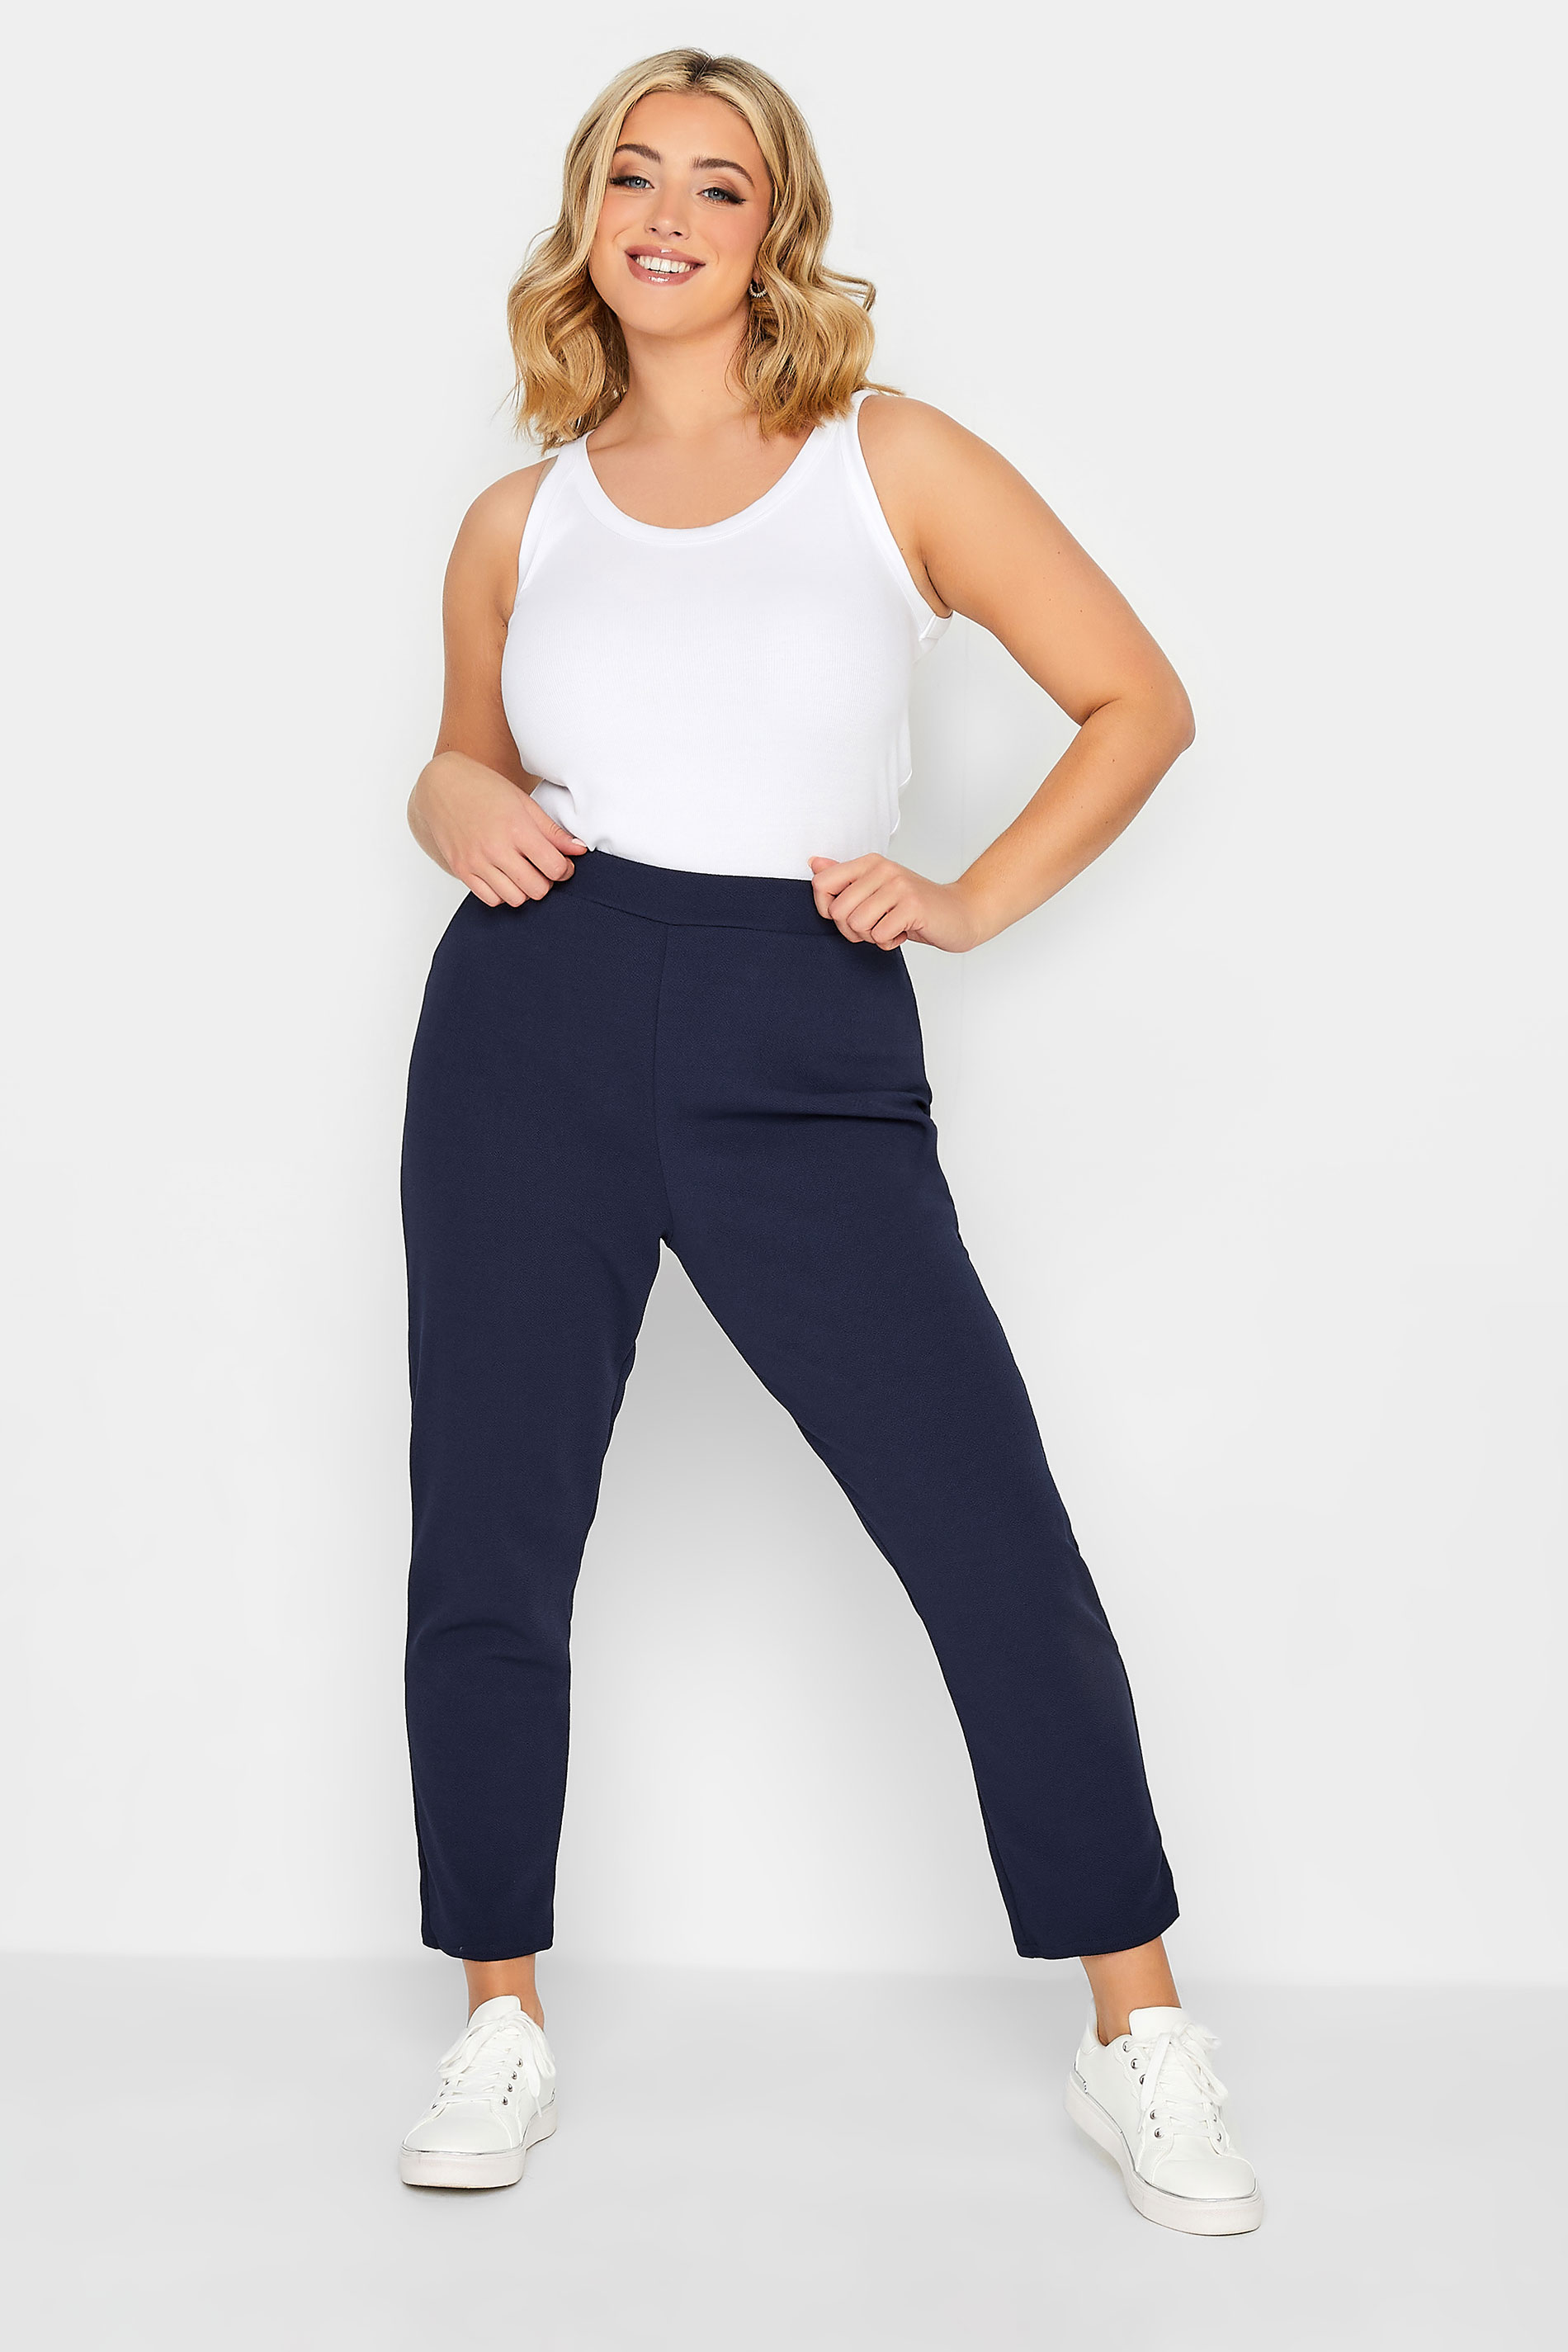 YOURS PETITE Plus Size Navy Blue Textured Slim Leg Trousers | Yours Clothing 2